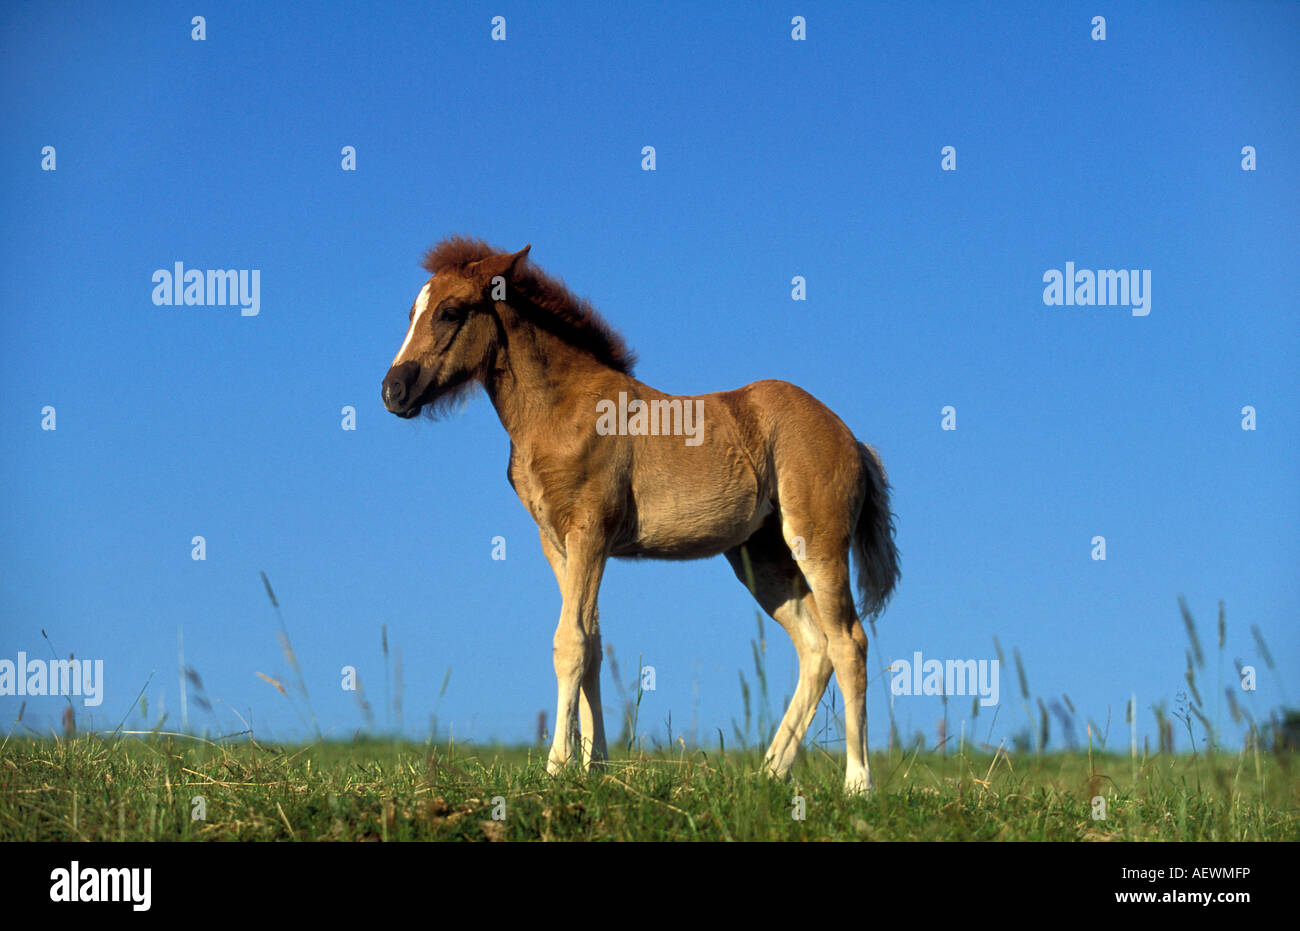 Paso Peruano Horse colt standing on a summerlike grassland Stock Photo